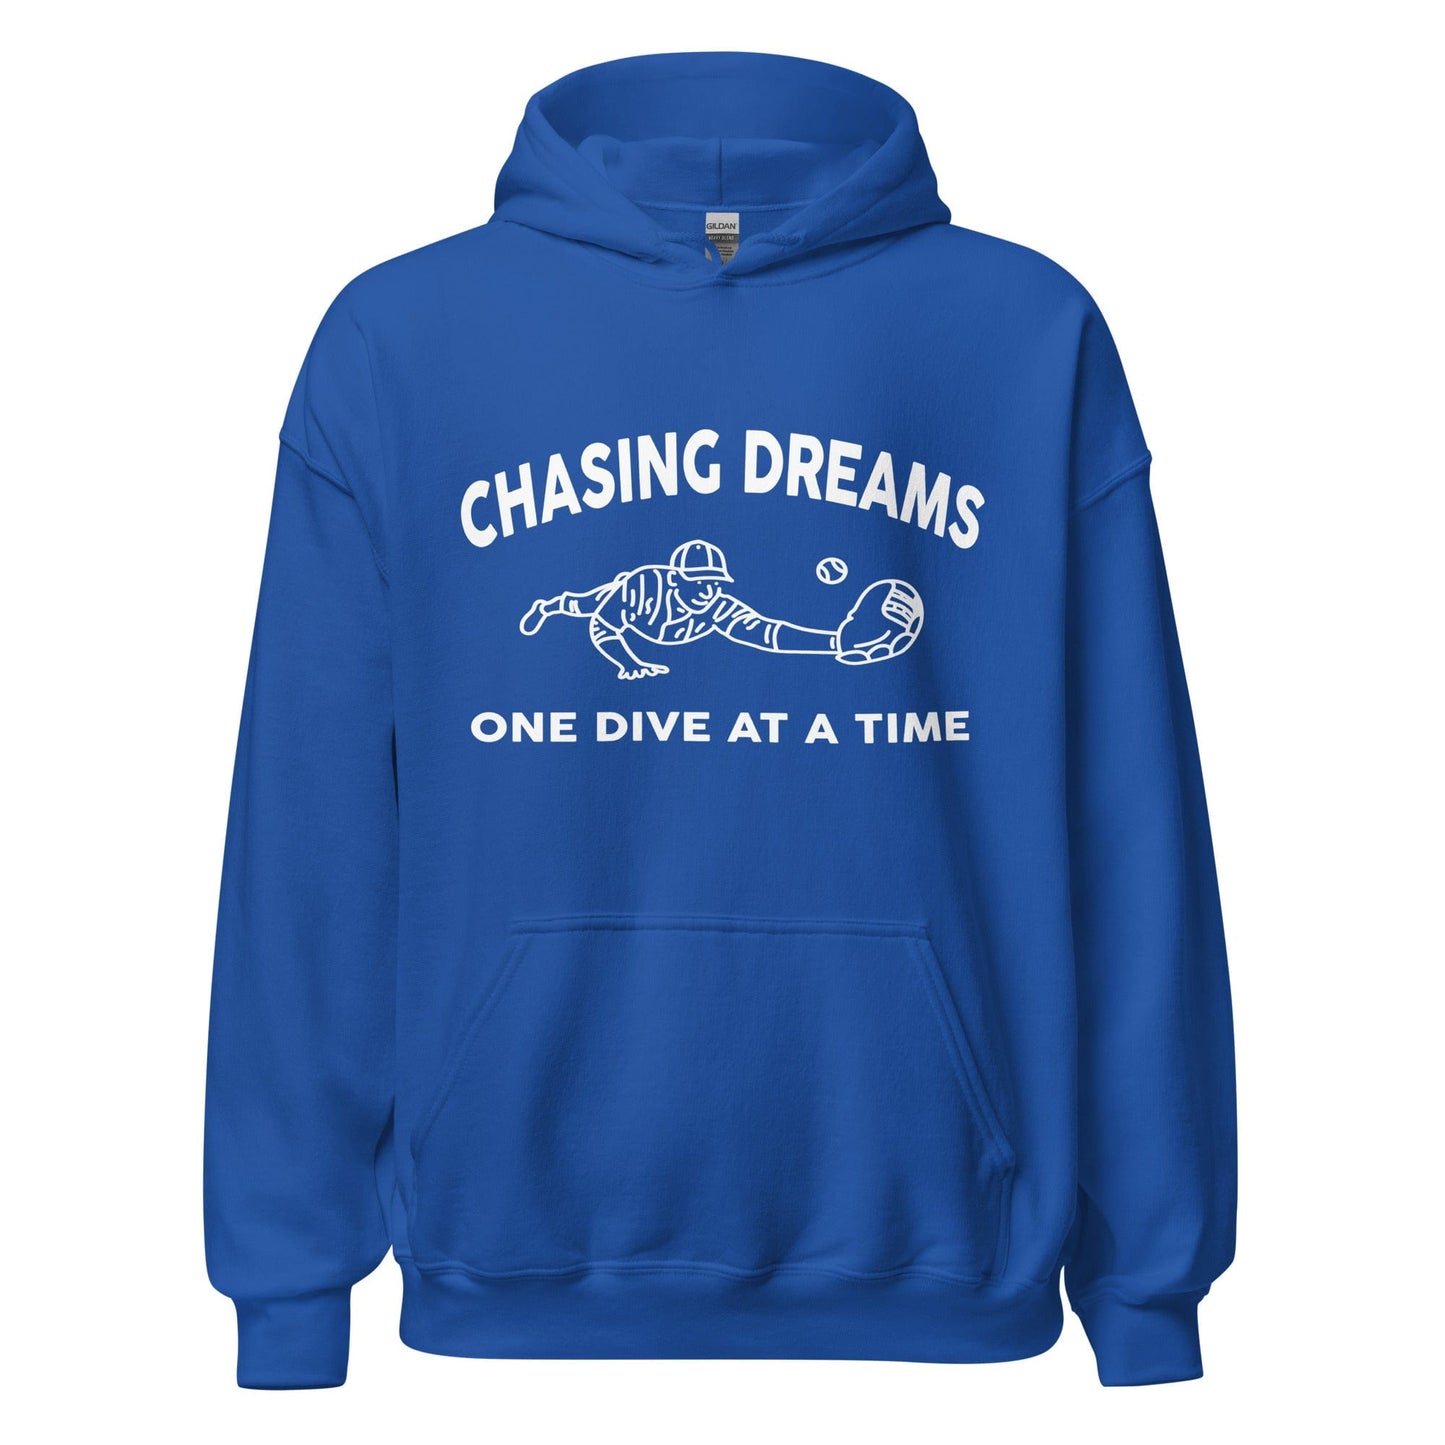 Chasing Dreams One Dive At A Time - Adult Hoodie